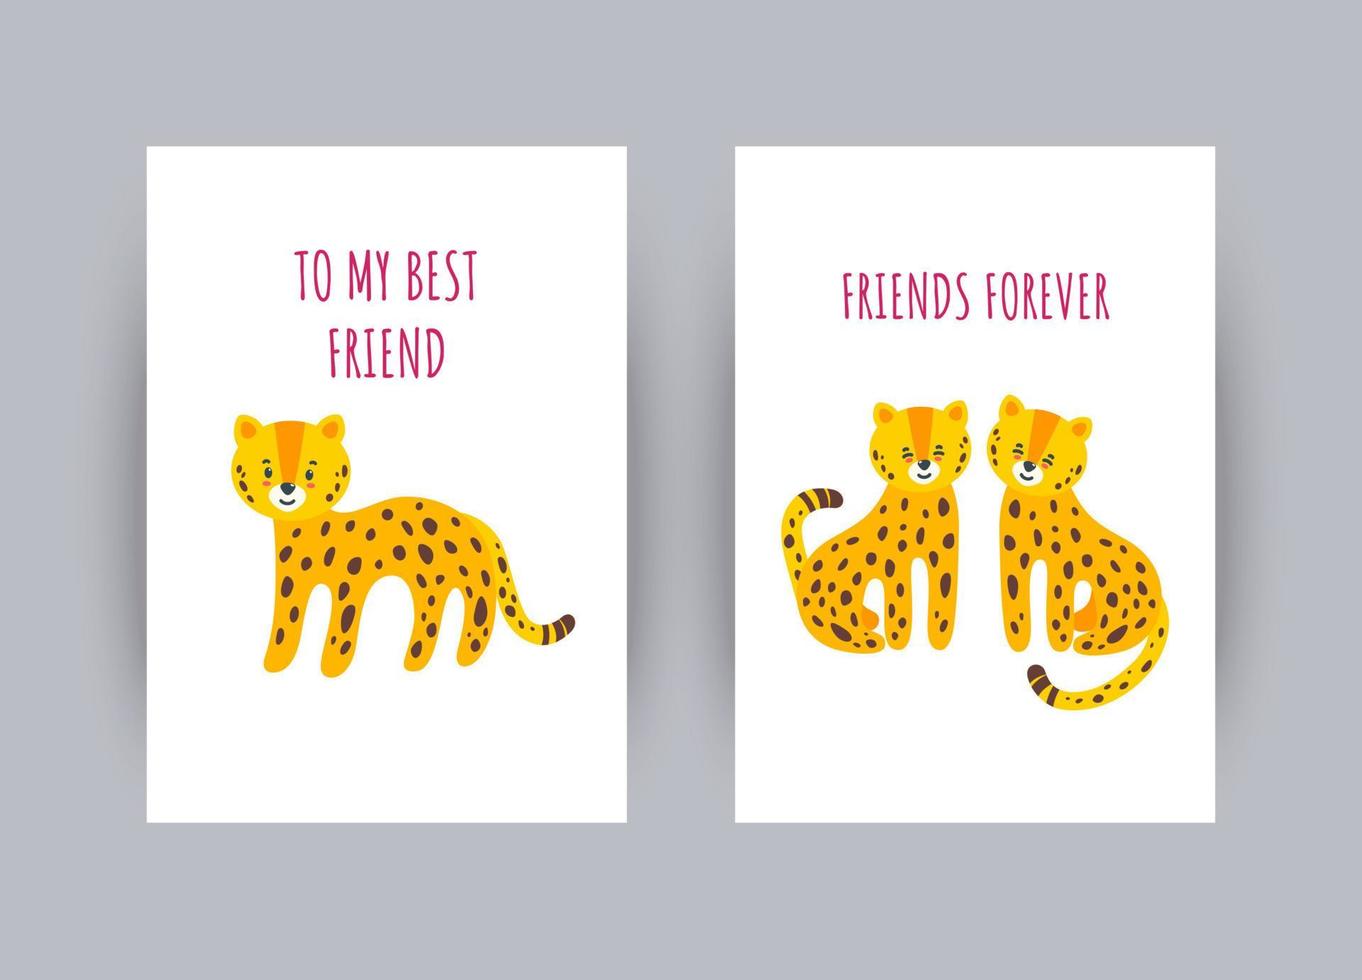 Greeting card with leopards. Cards about friendship with cute leopard character. Vector illustration